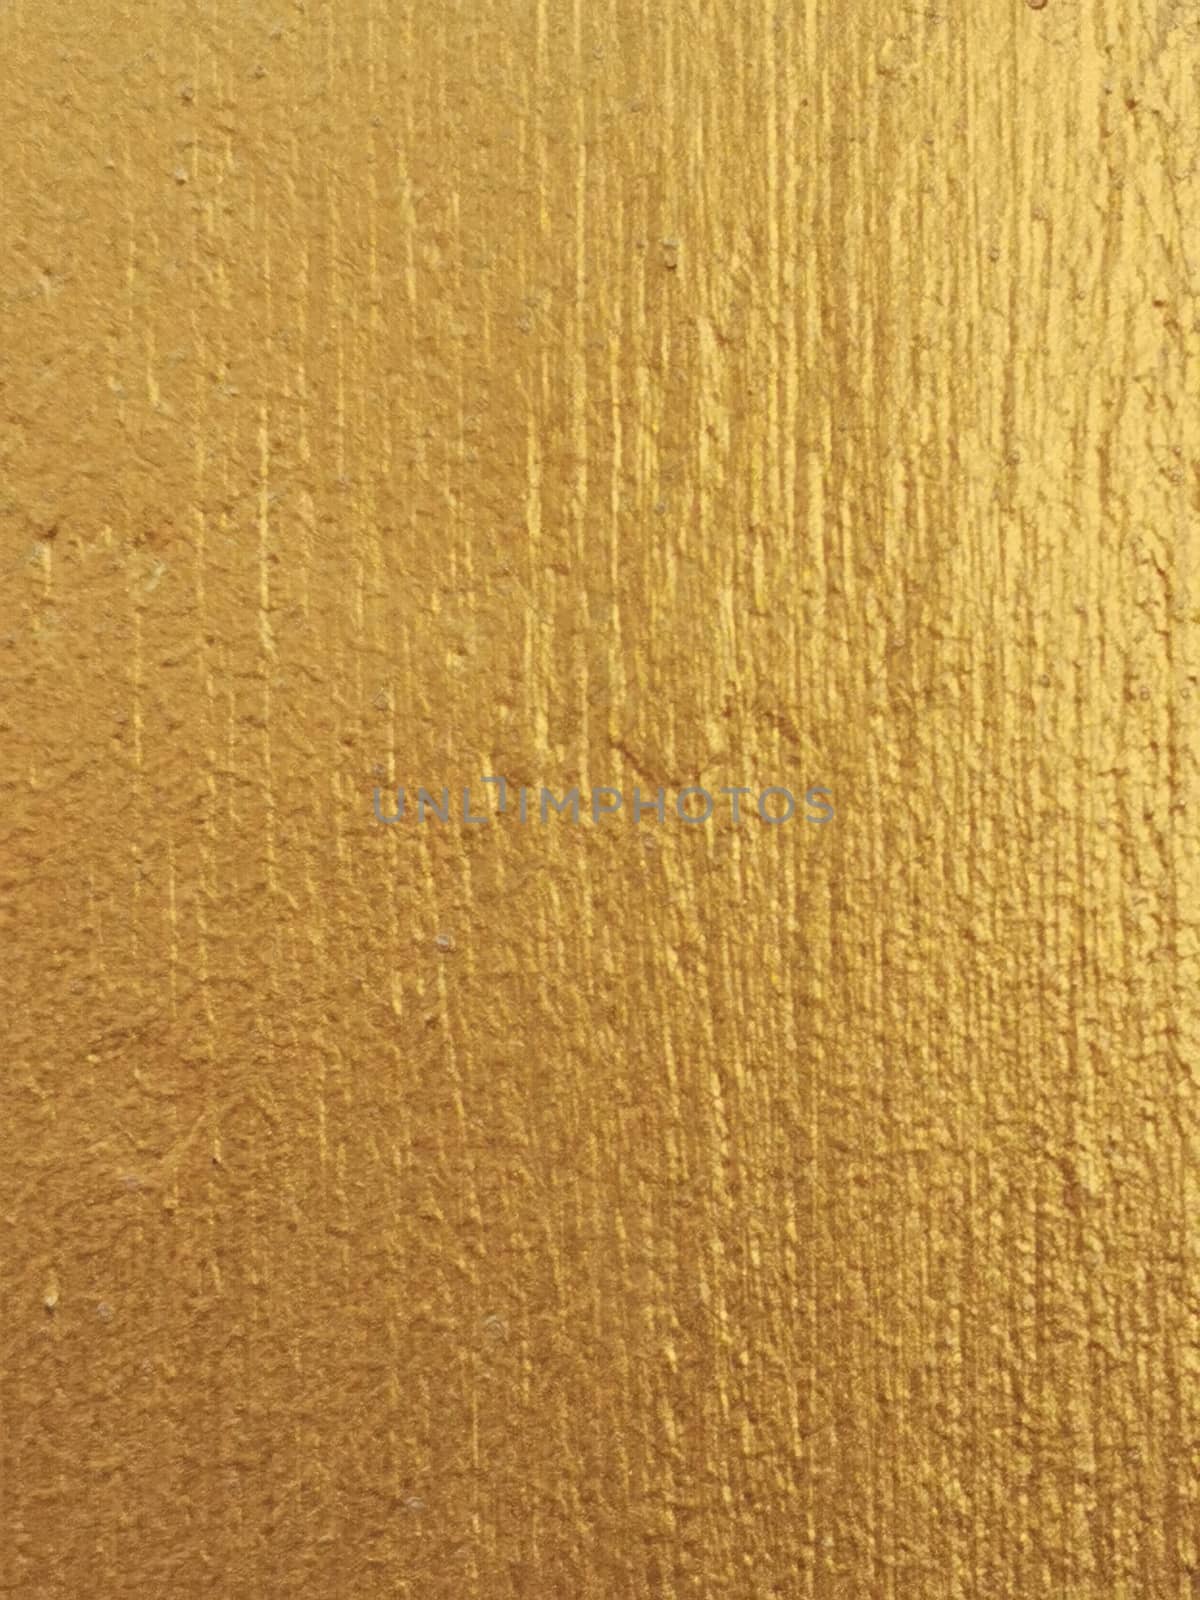 Luxurious Golden texture background or gold background pattern for graphic content.